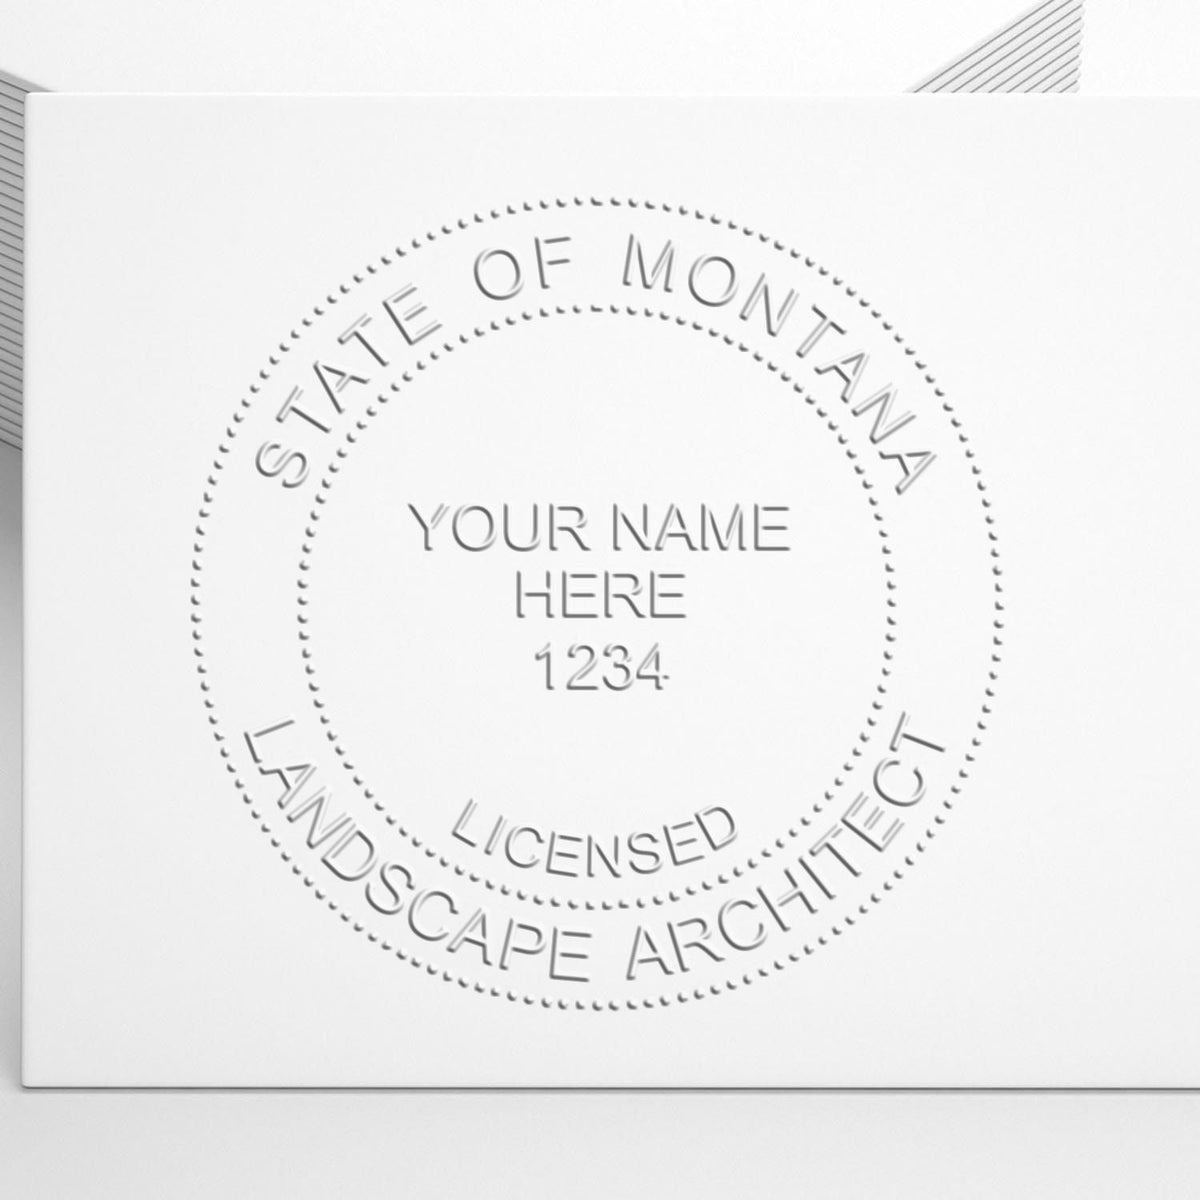 A stamped impression of the Soft Pocket Montana Landscape Architect Embosser in this stylish lifestyle photo, setting the tone for a unique and personalized product.